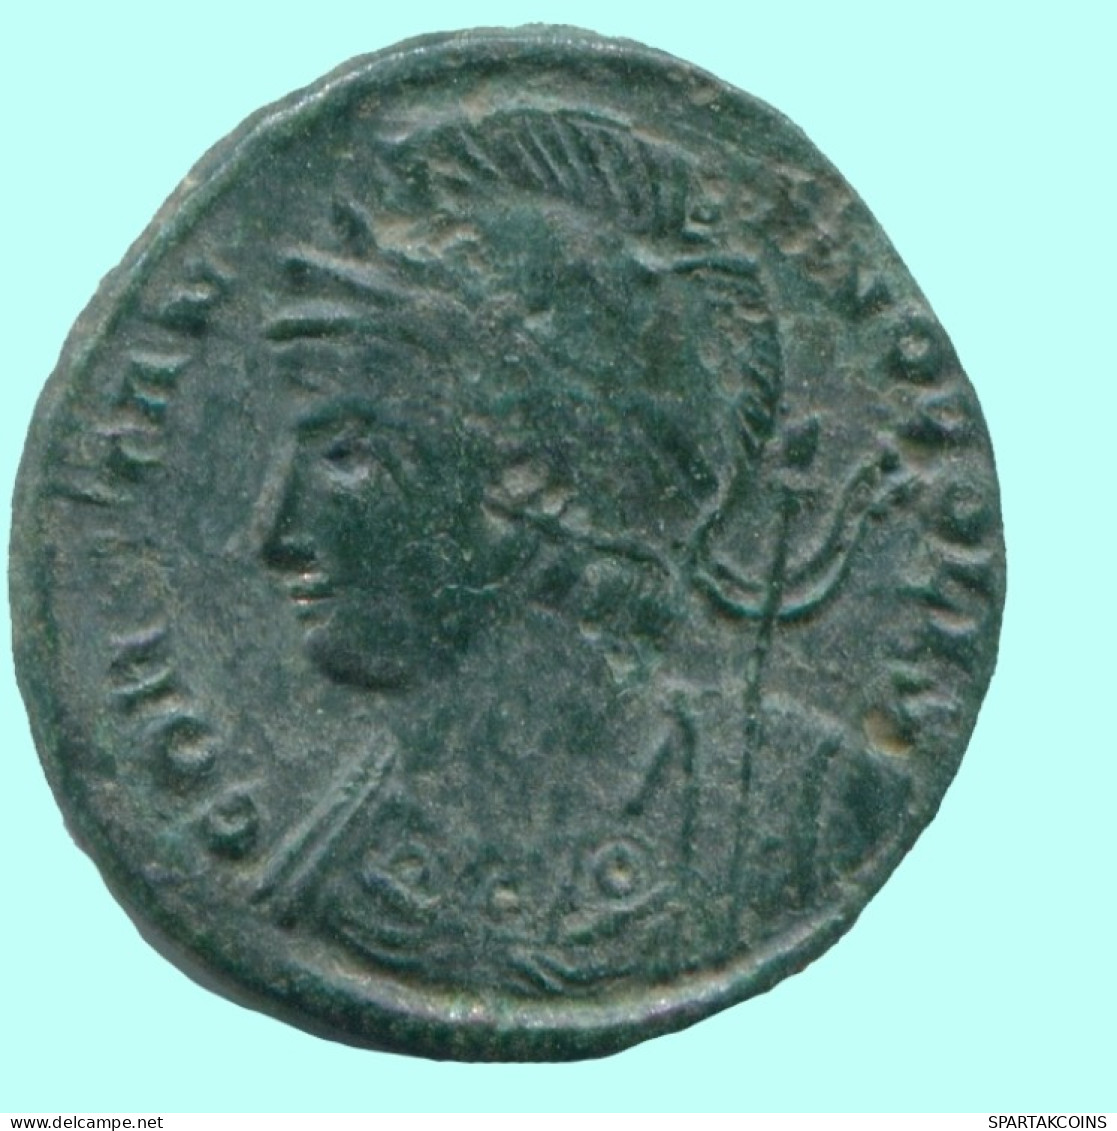 CONSTANTINOPOLIS AD 334-335 VICTORY BSIS 2.2g/18mm #ANC13068.17.D.A - The Christian Empire (307 AD To 363 AD)